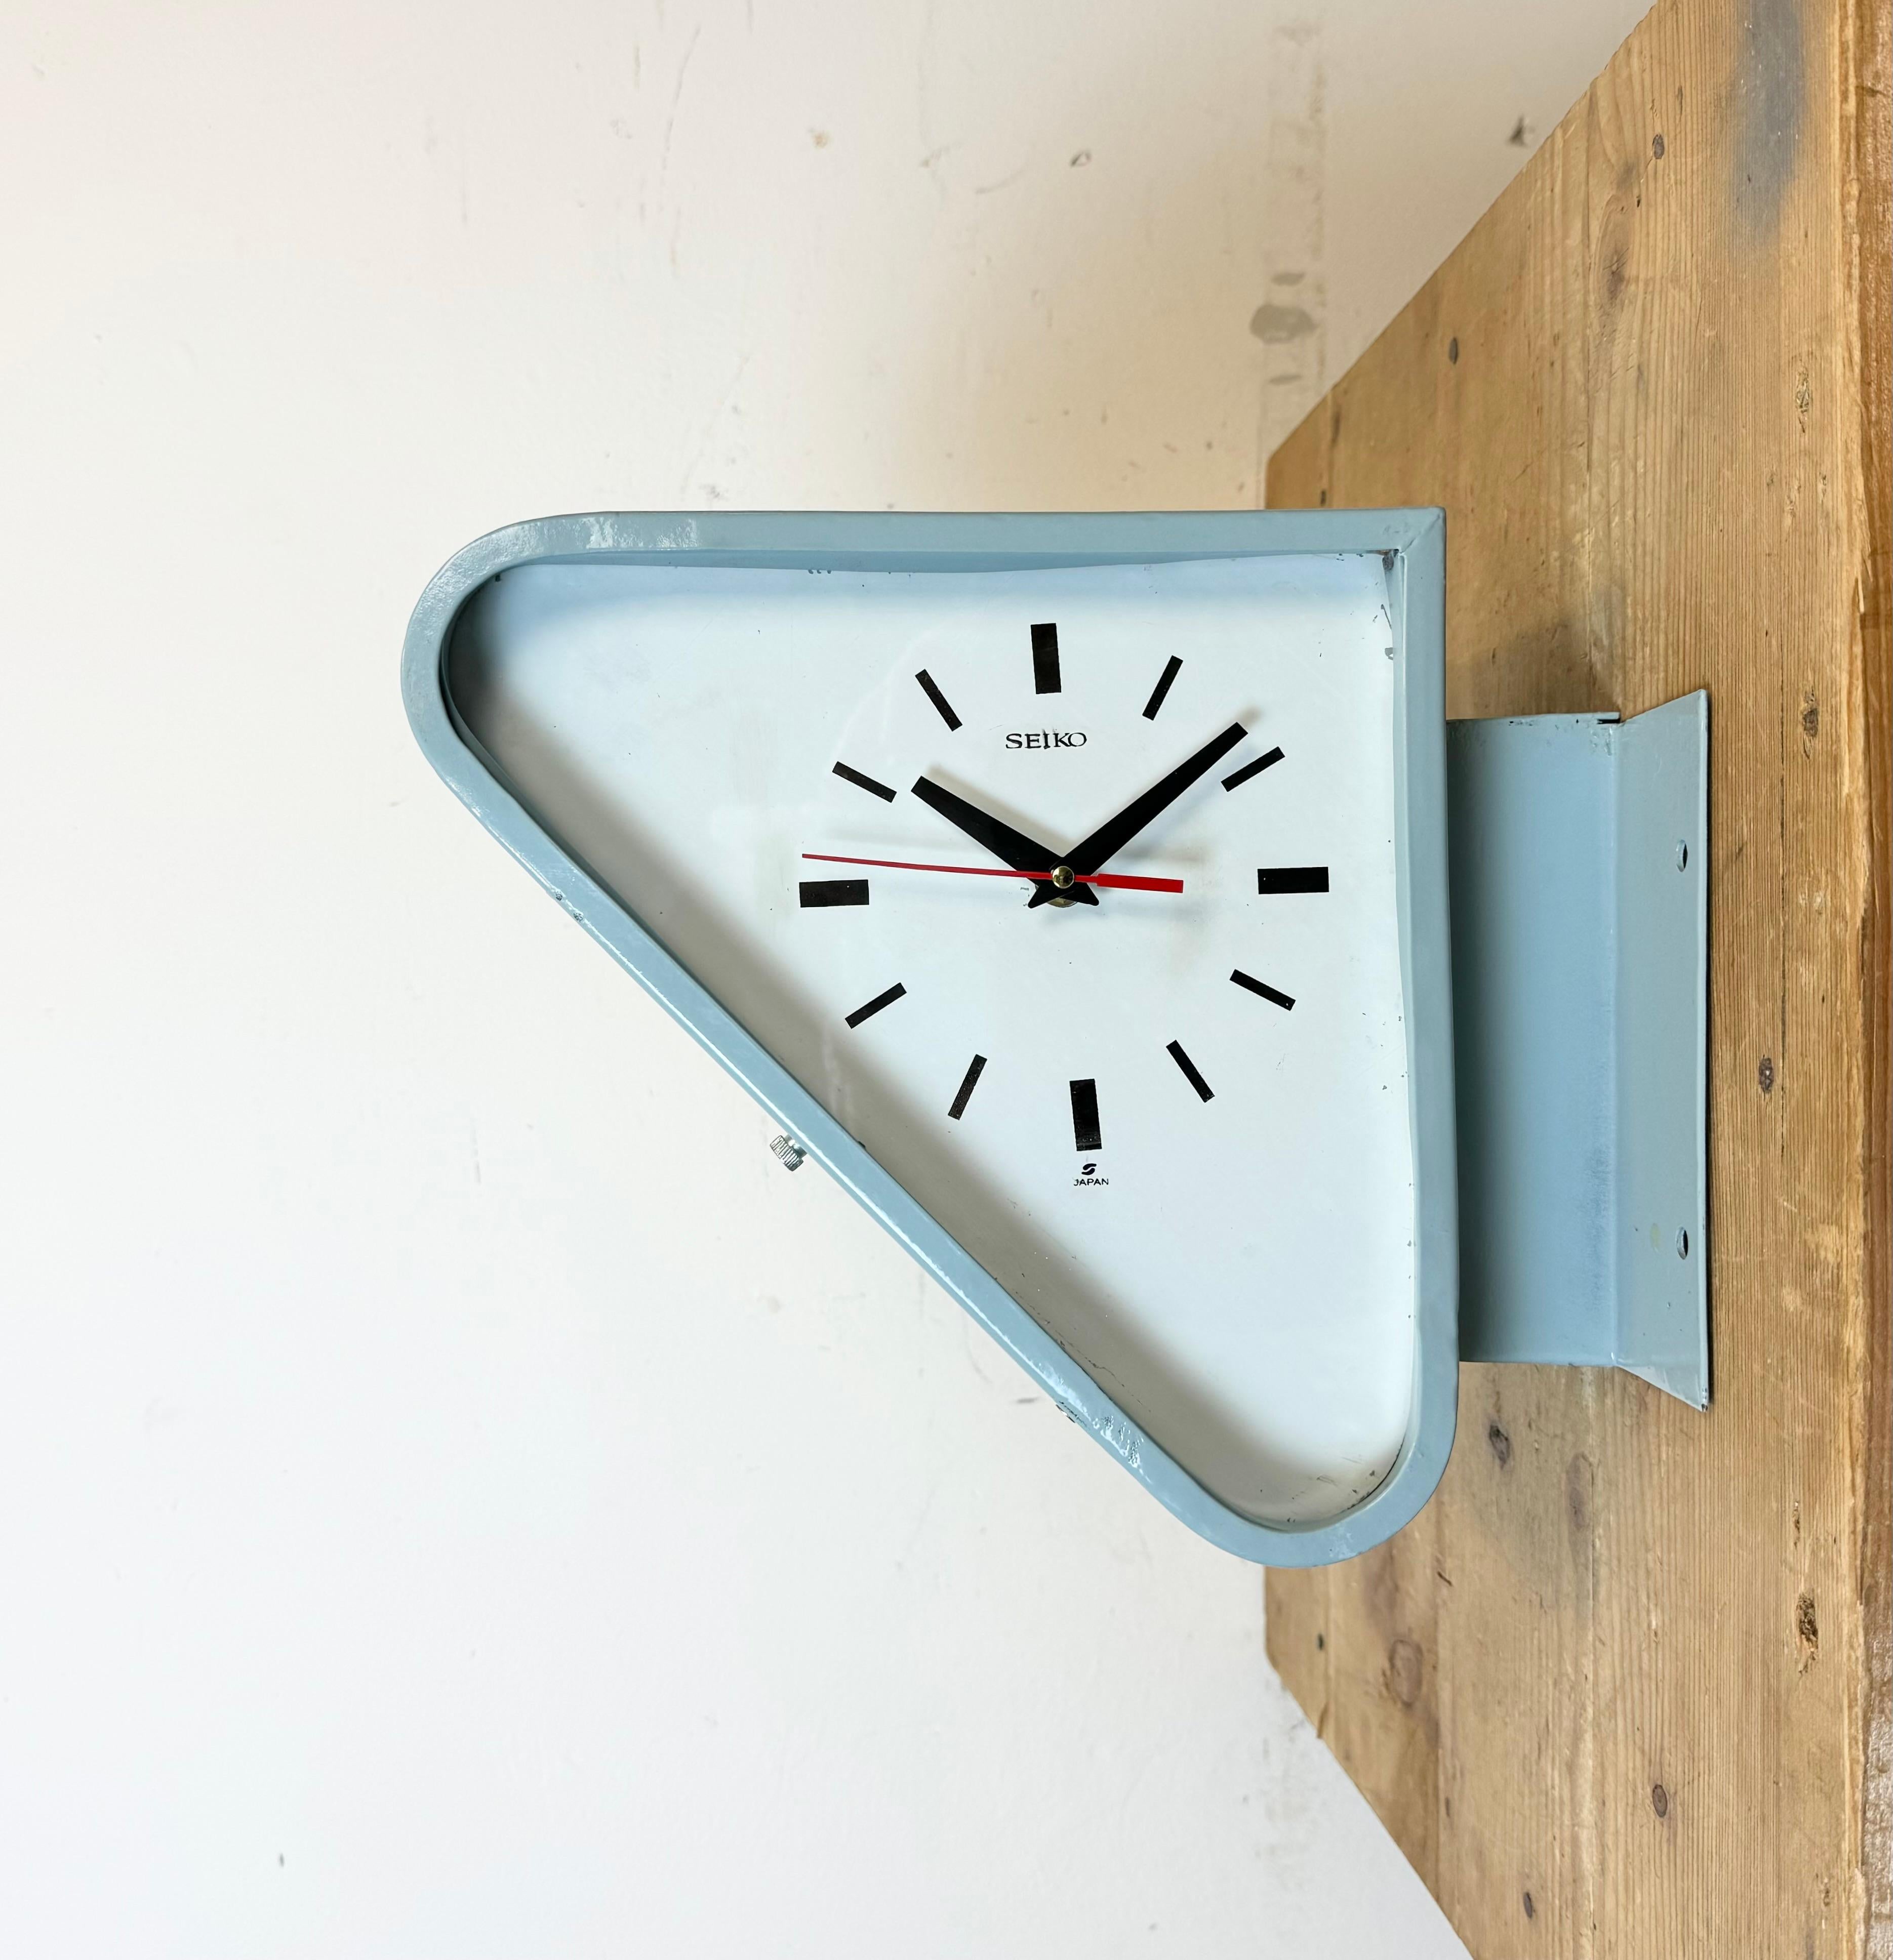 Vintage Industrial triangle Seiko navy slave clock made in Japan during the 1970s. These clocks were used on large tankers and cargo ships. It features a light blue metal body, a metal dials and a clear glass covers. Former electric slave clock has